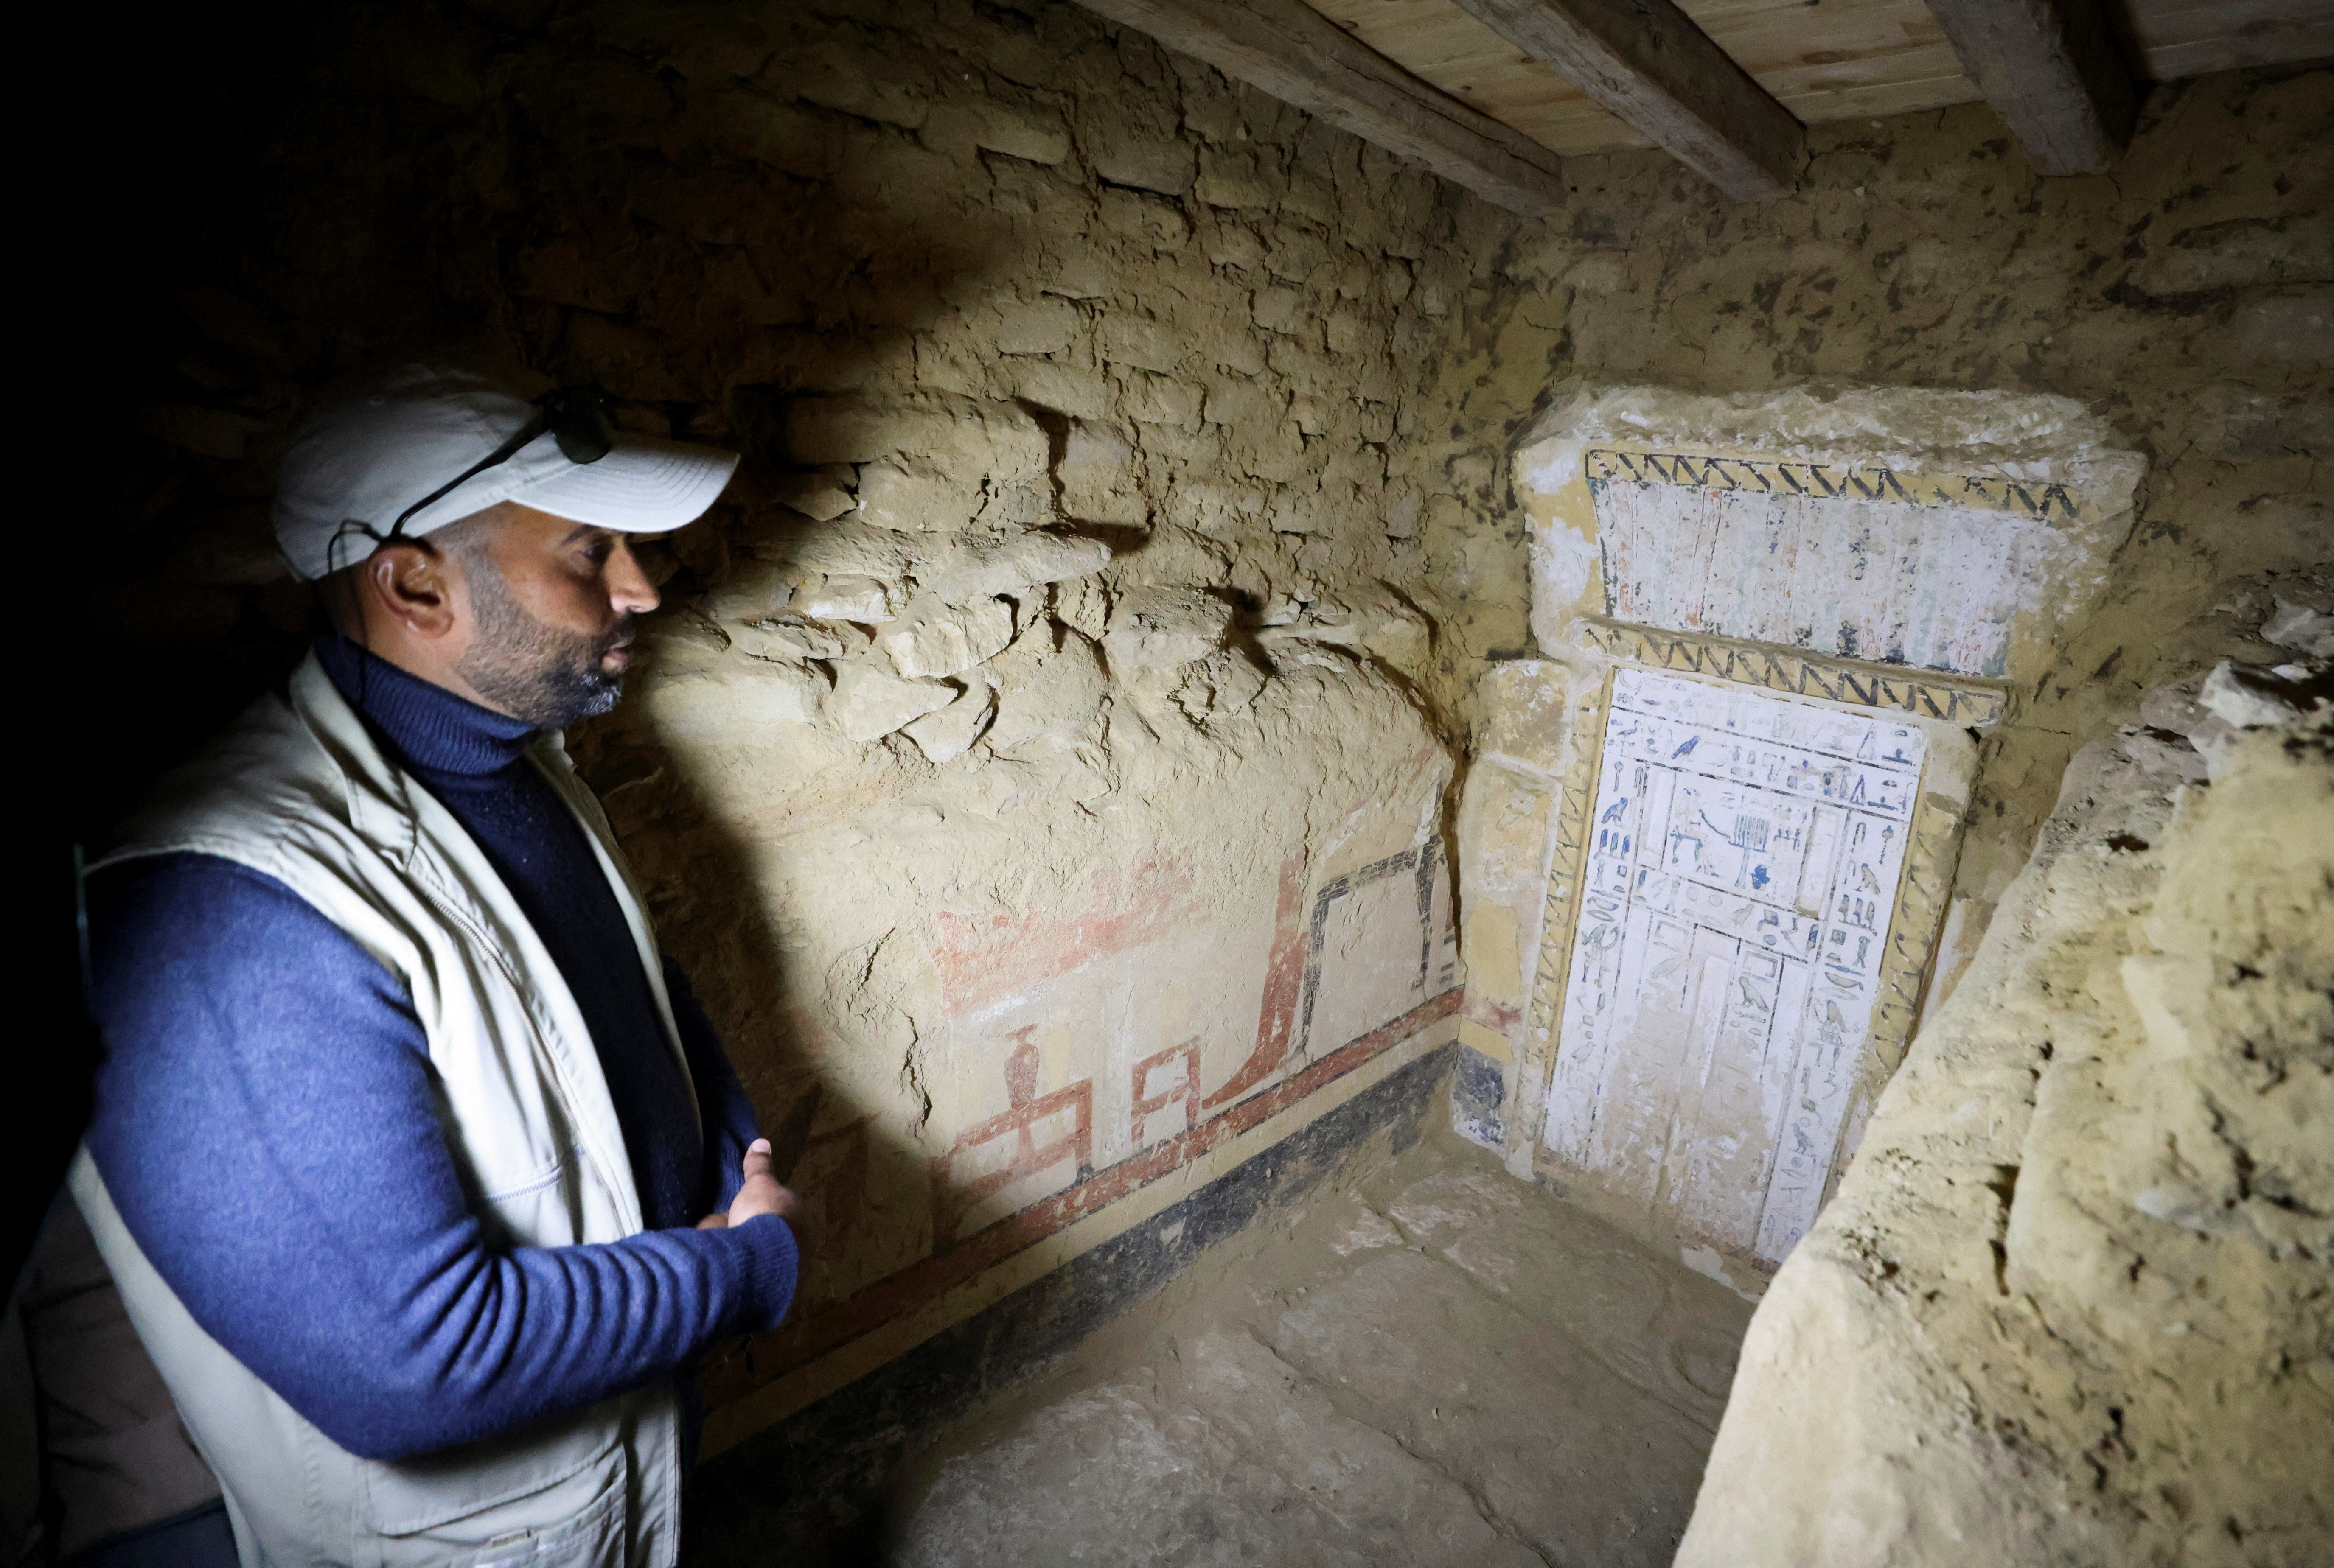 A general view inside a tomb after the announcement of the discovery of 4,300-year-old sealed tombs discovered in Egypt's Saqqara necropolis, in Giza